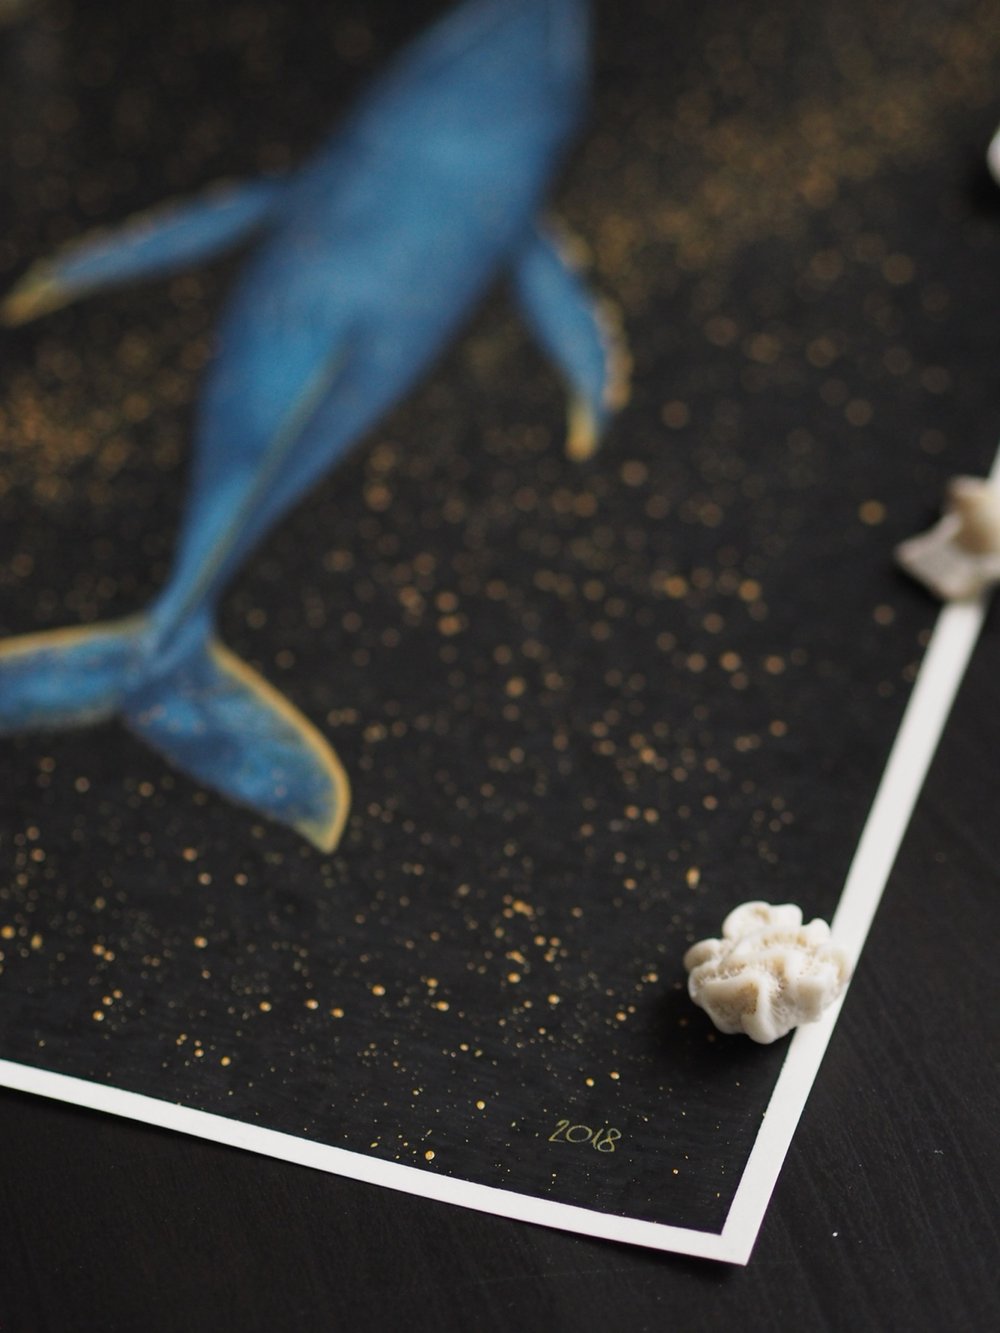 The Lonely Whale - 2018 Edition Art Print Extra Heavyweight Matte Blue Gold Galaxy A3